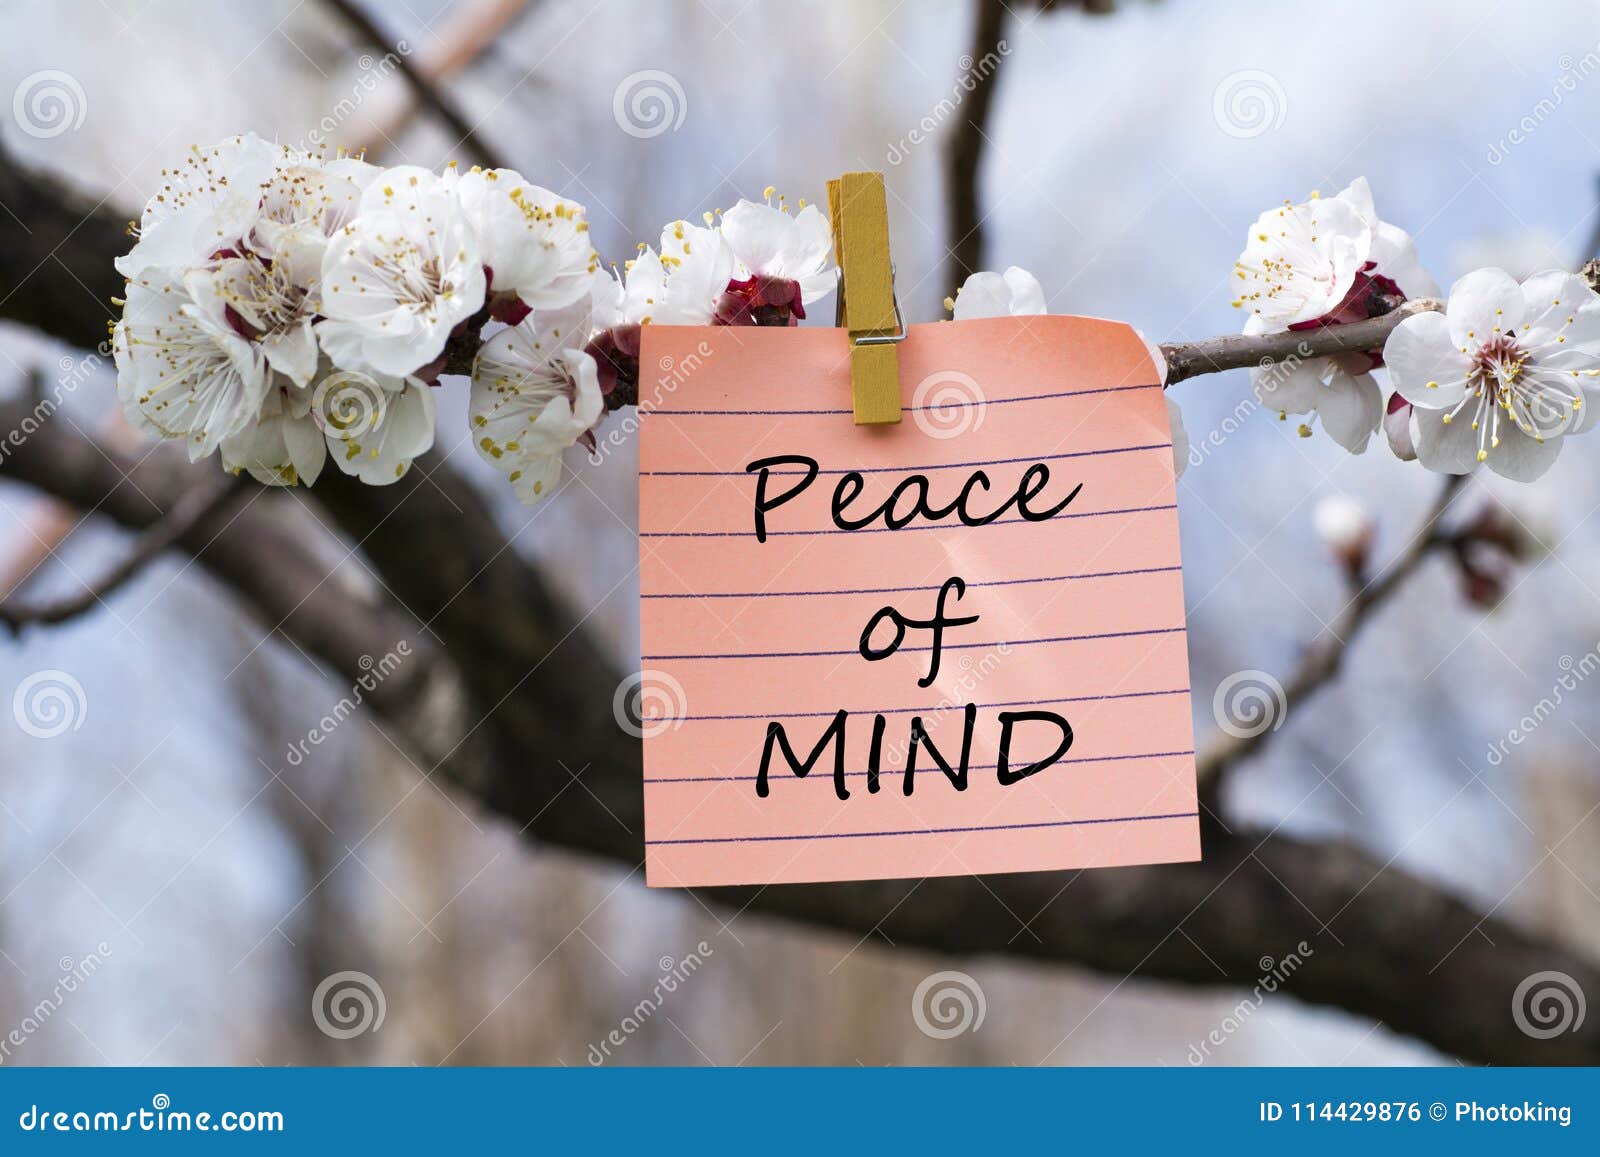 peace of mind in memo